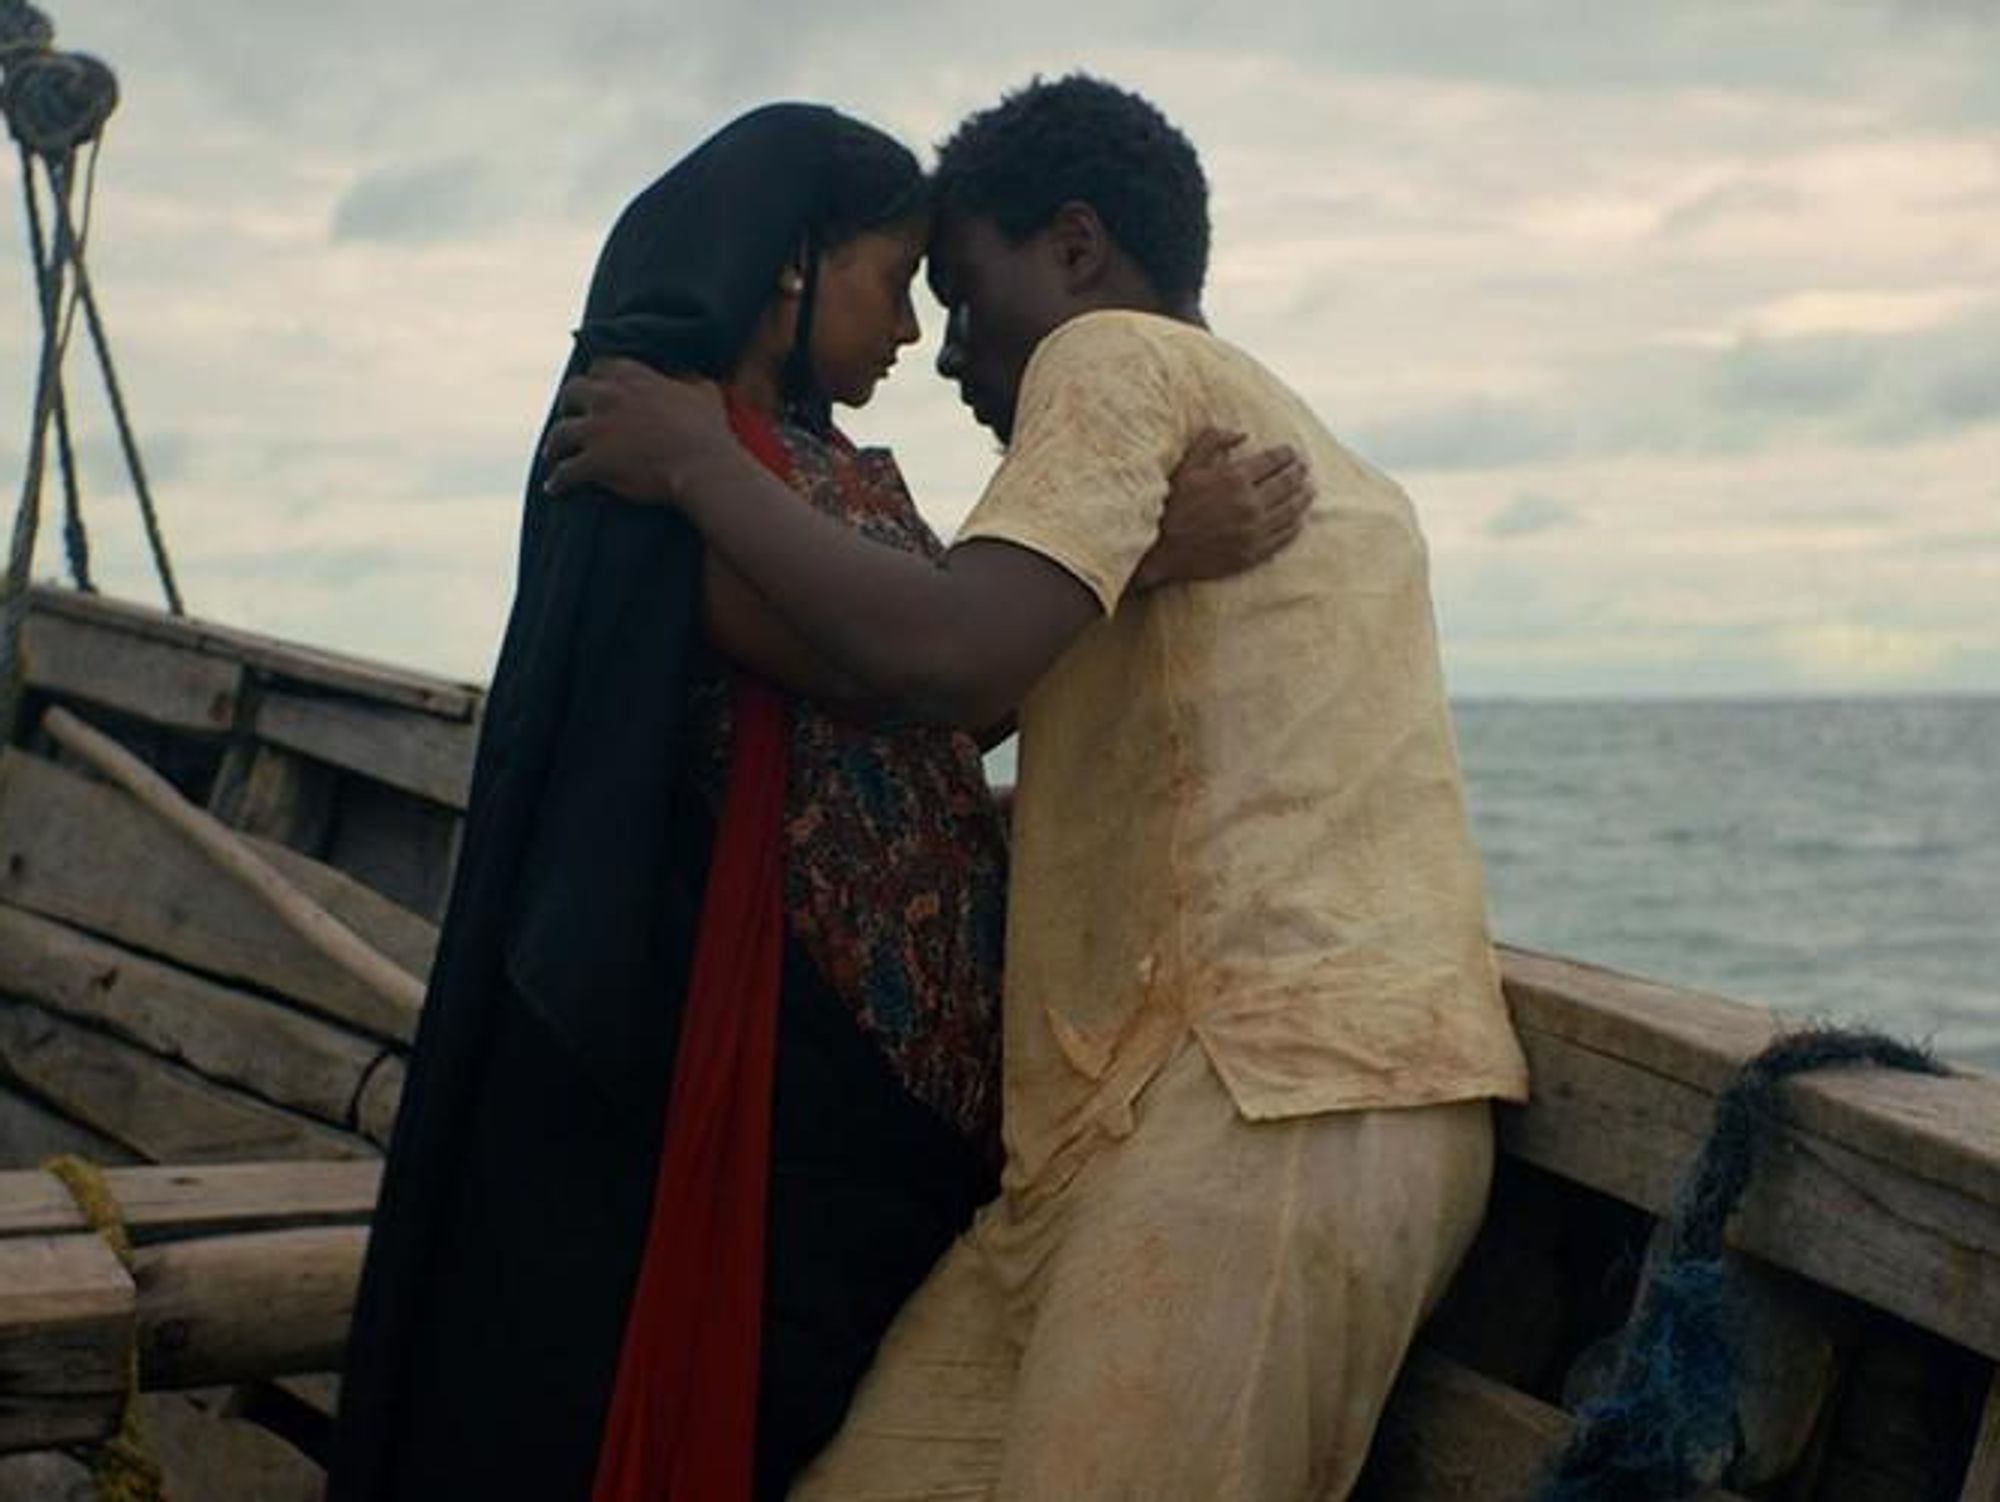 A still from the film of a man and woman holding each other on a boat